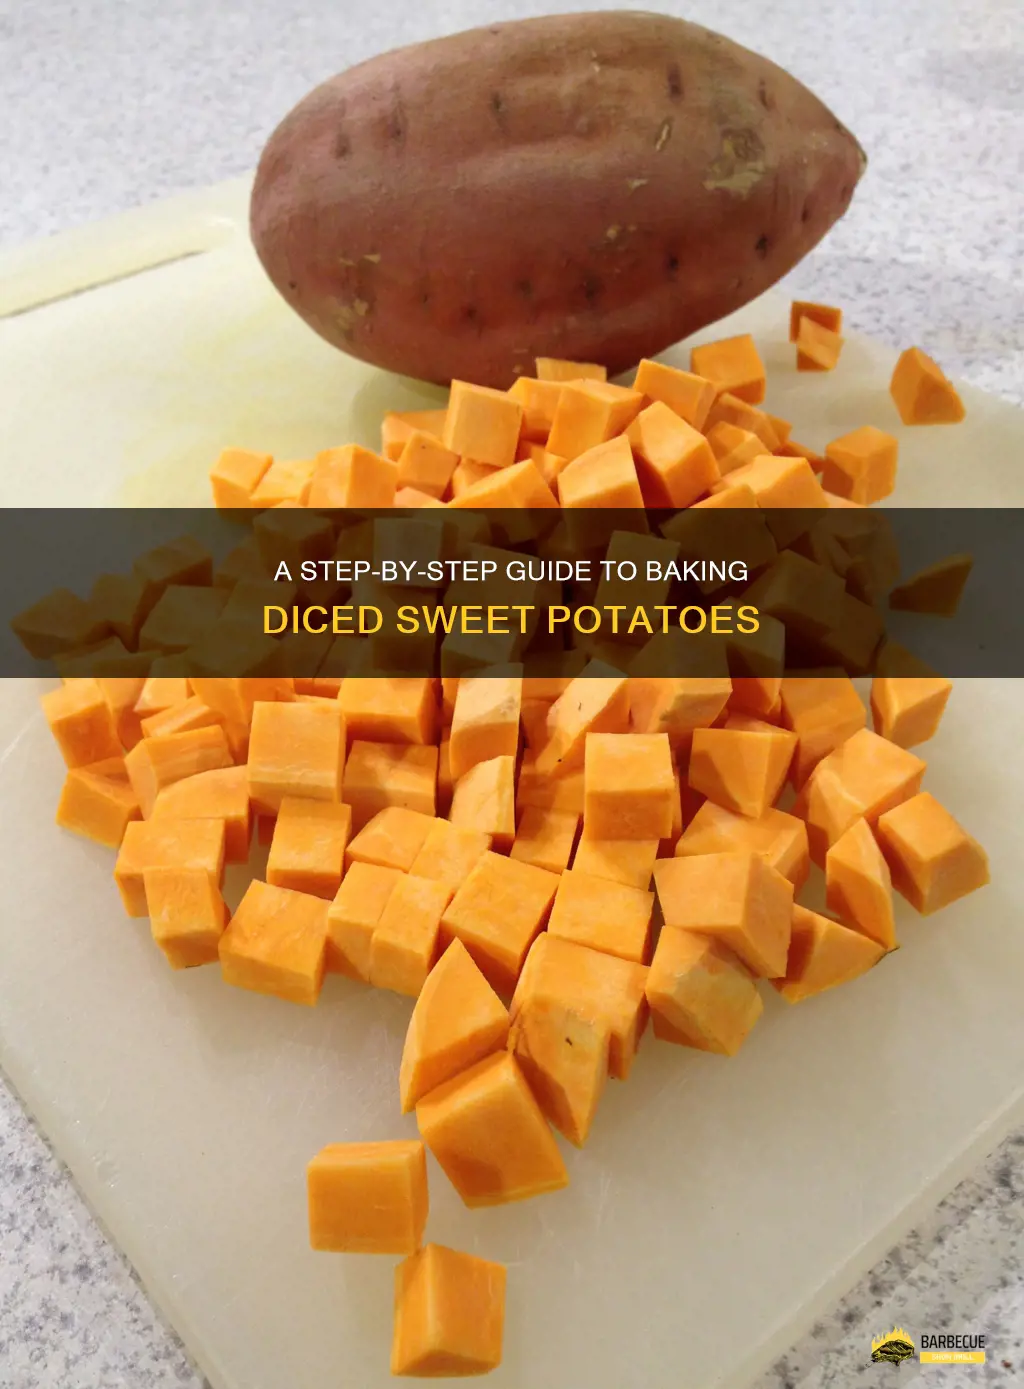 A Step-By-Step Guide To Baking Diced Sweet Potatoes | ShunGrill